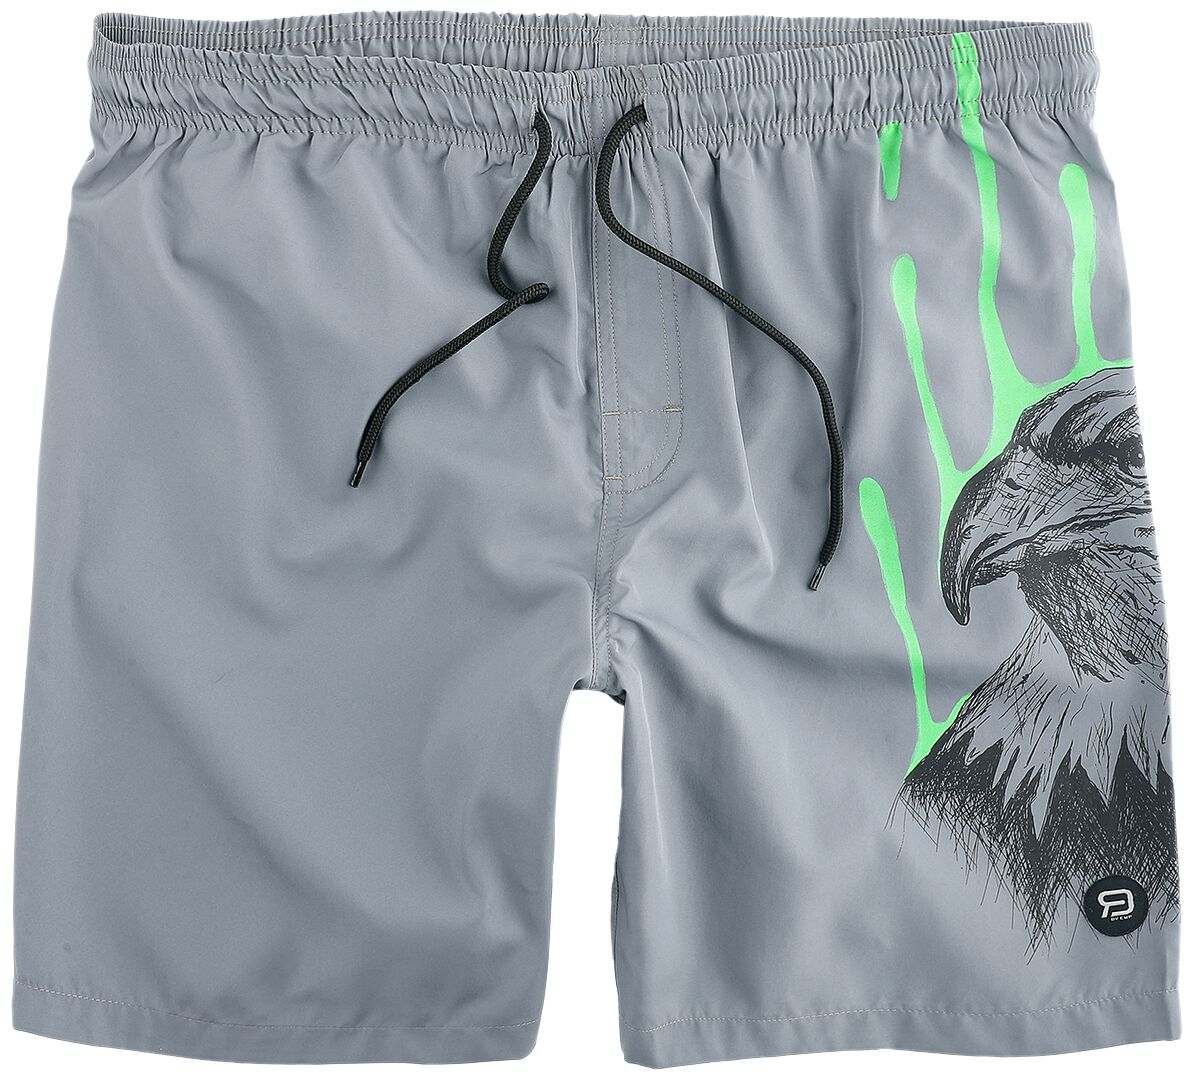 Image of Bermuda di RED by EMP - Swimshorts with Eagle Print - S a M - Uomo - grigio